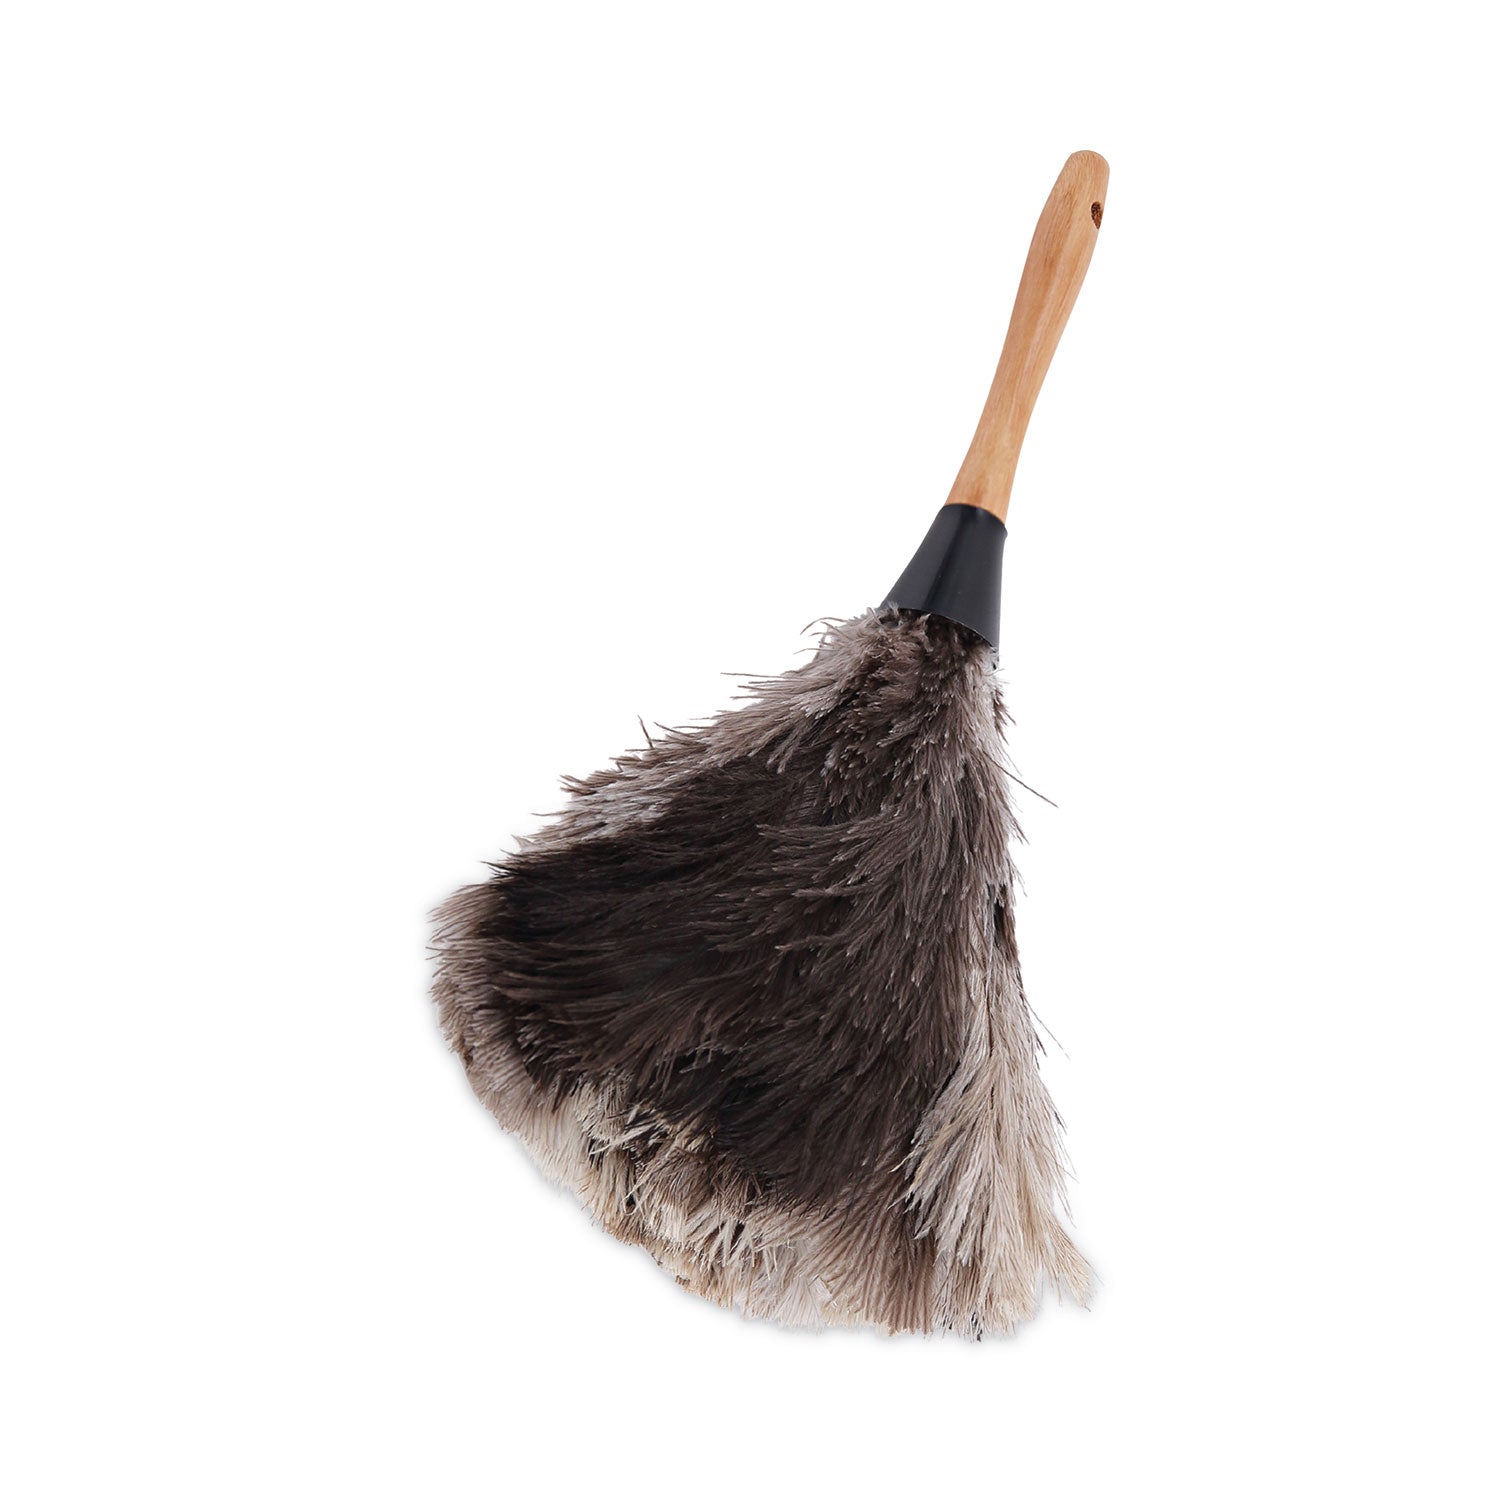 professional-ostrich-feather-duster-7-handle_bwk13fd - 1